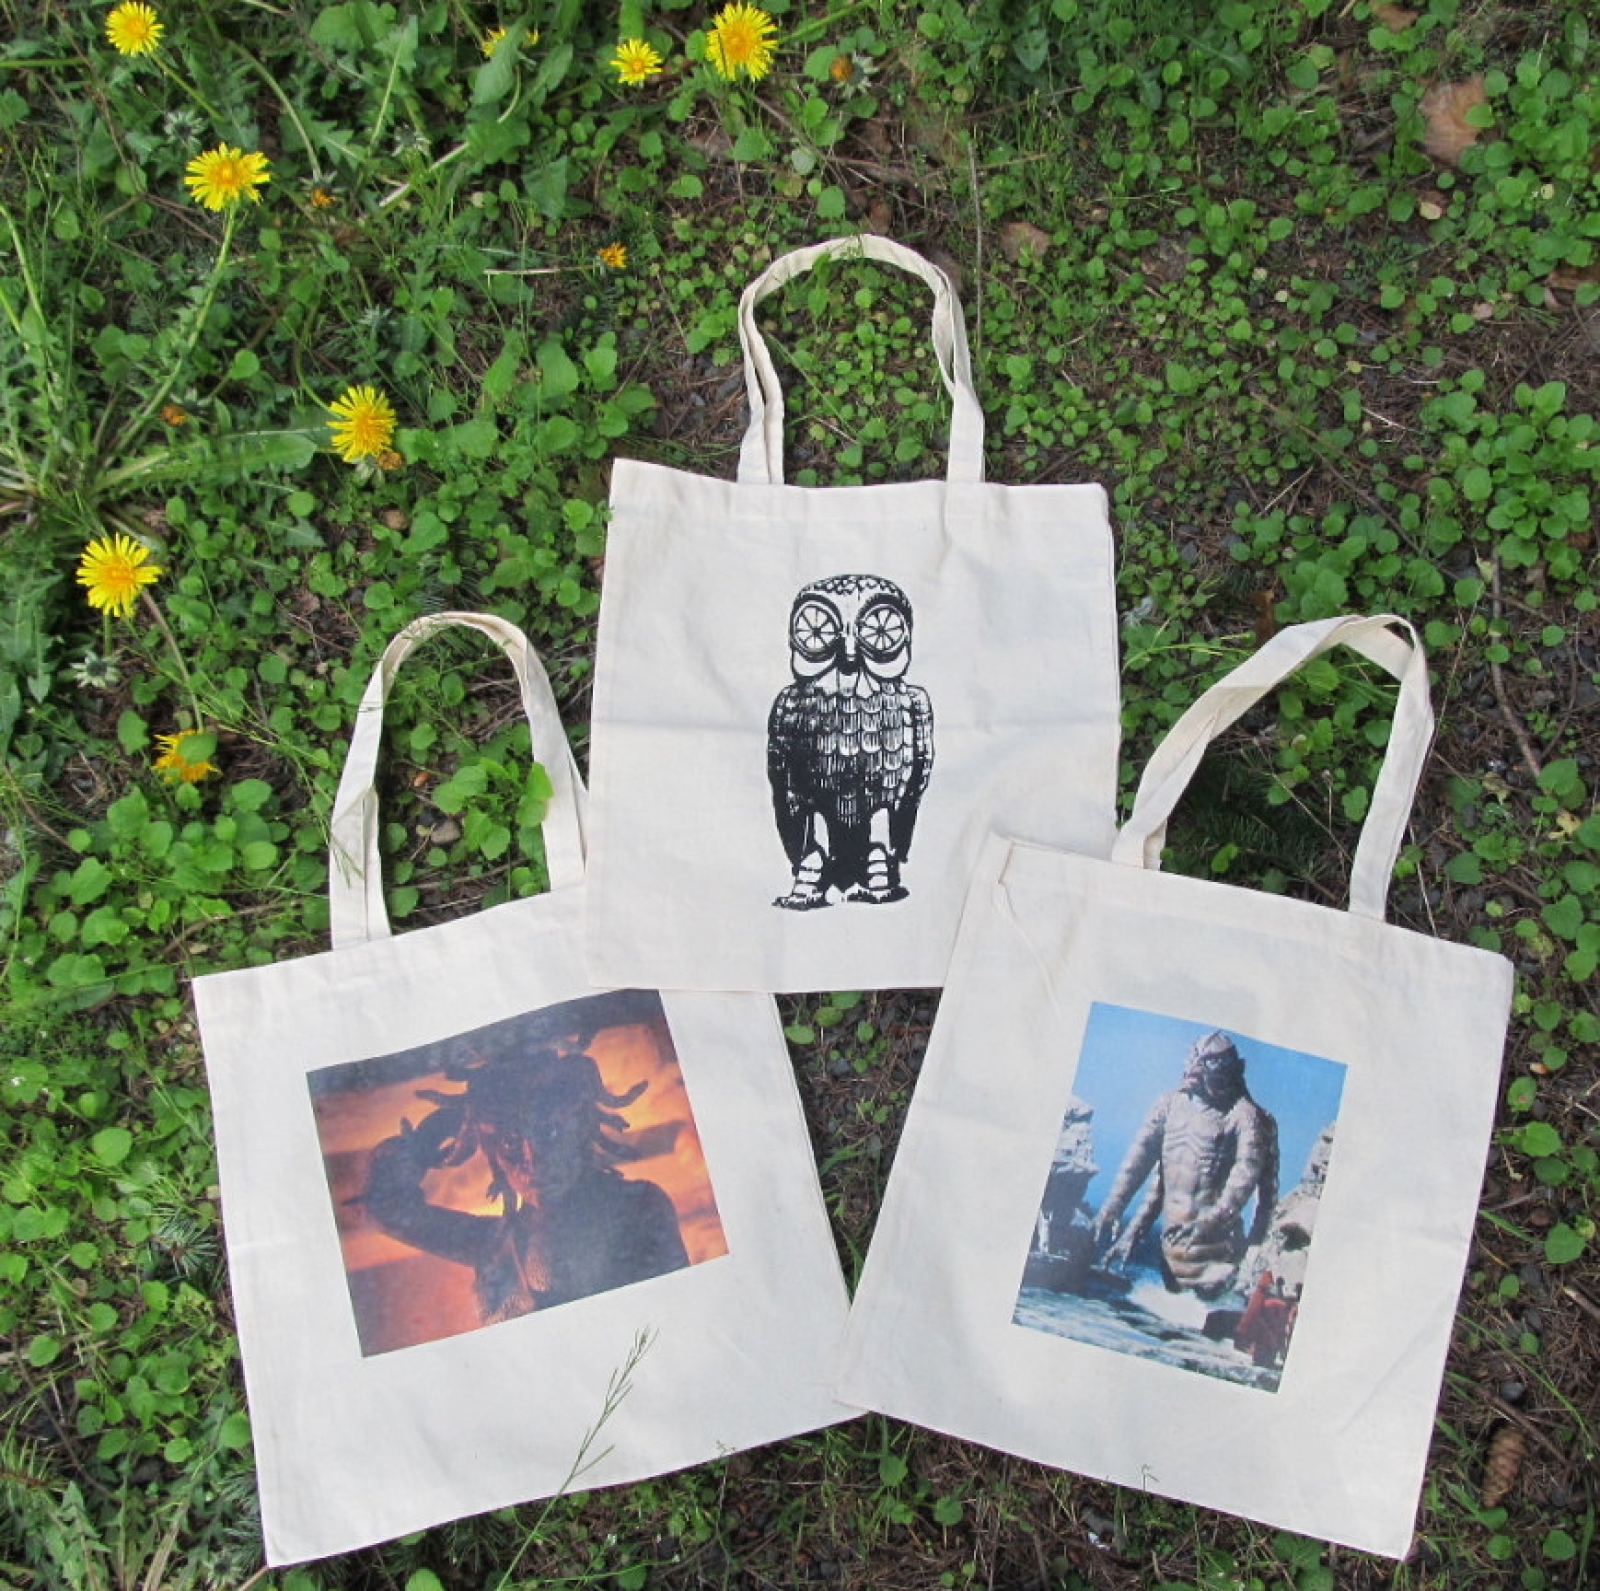 Custom Print Tote Bags - Any Design You Want on Sturdy, Natural